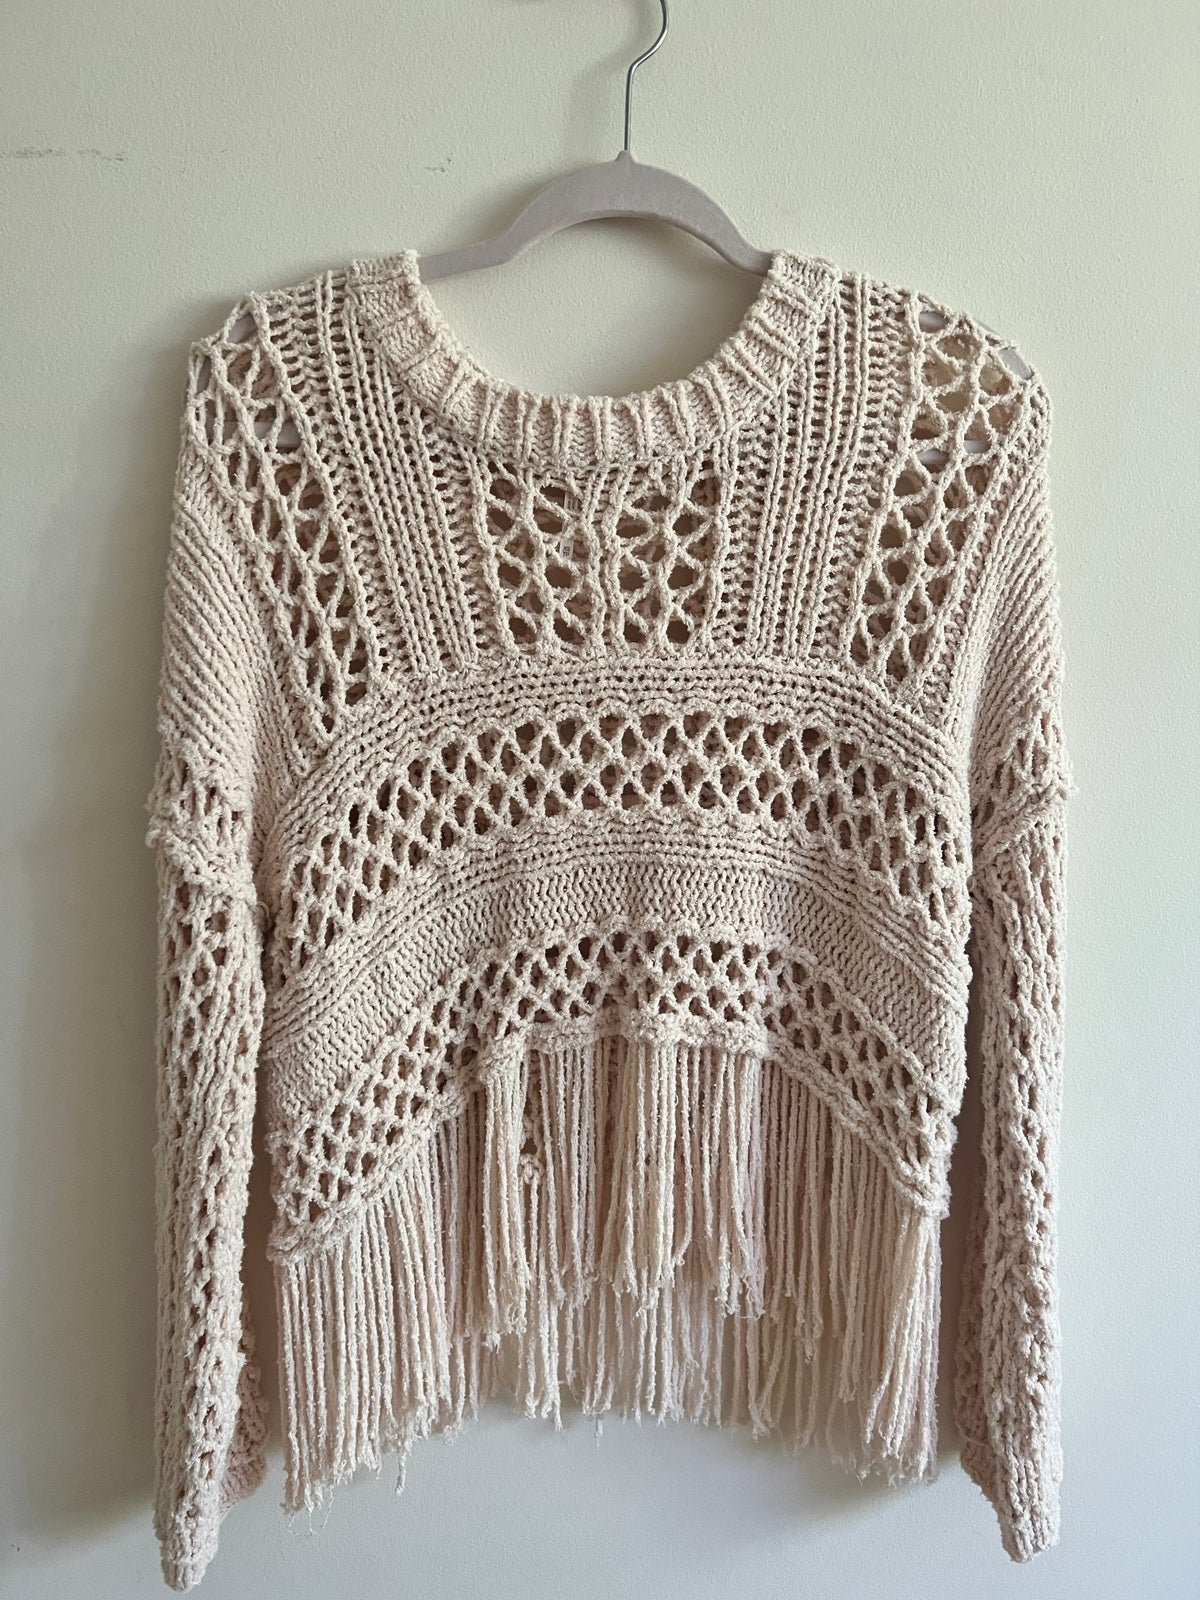 where to buy  Free People - Higher Love Fringe Crochet Sweater Size XS hsev1VUPj US Outlet